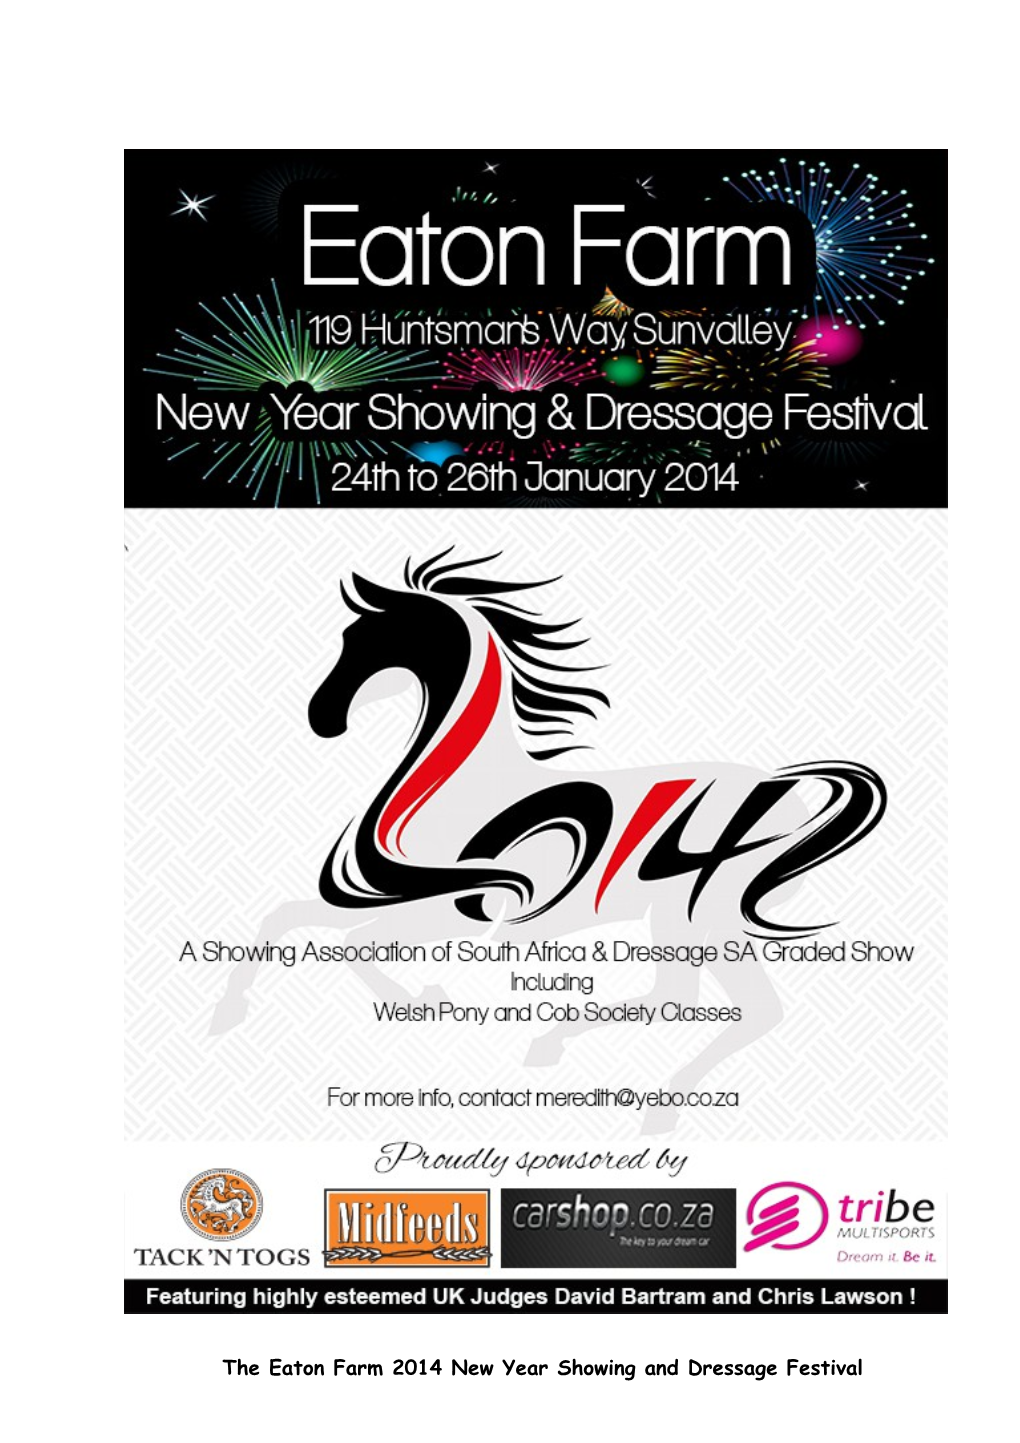 The Eaton Farm 2014 New Year Showing and Dressage Festival